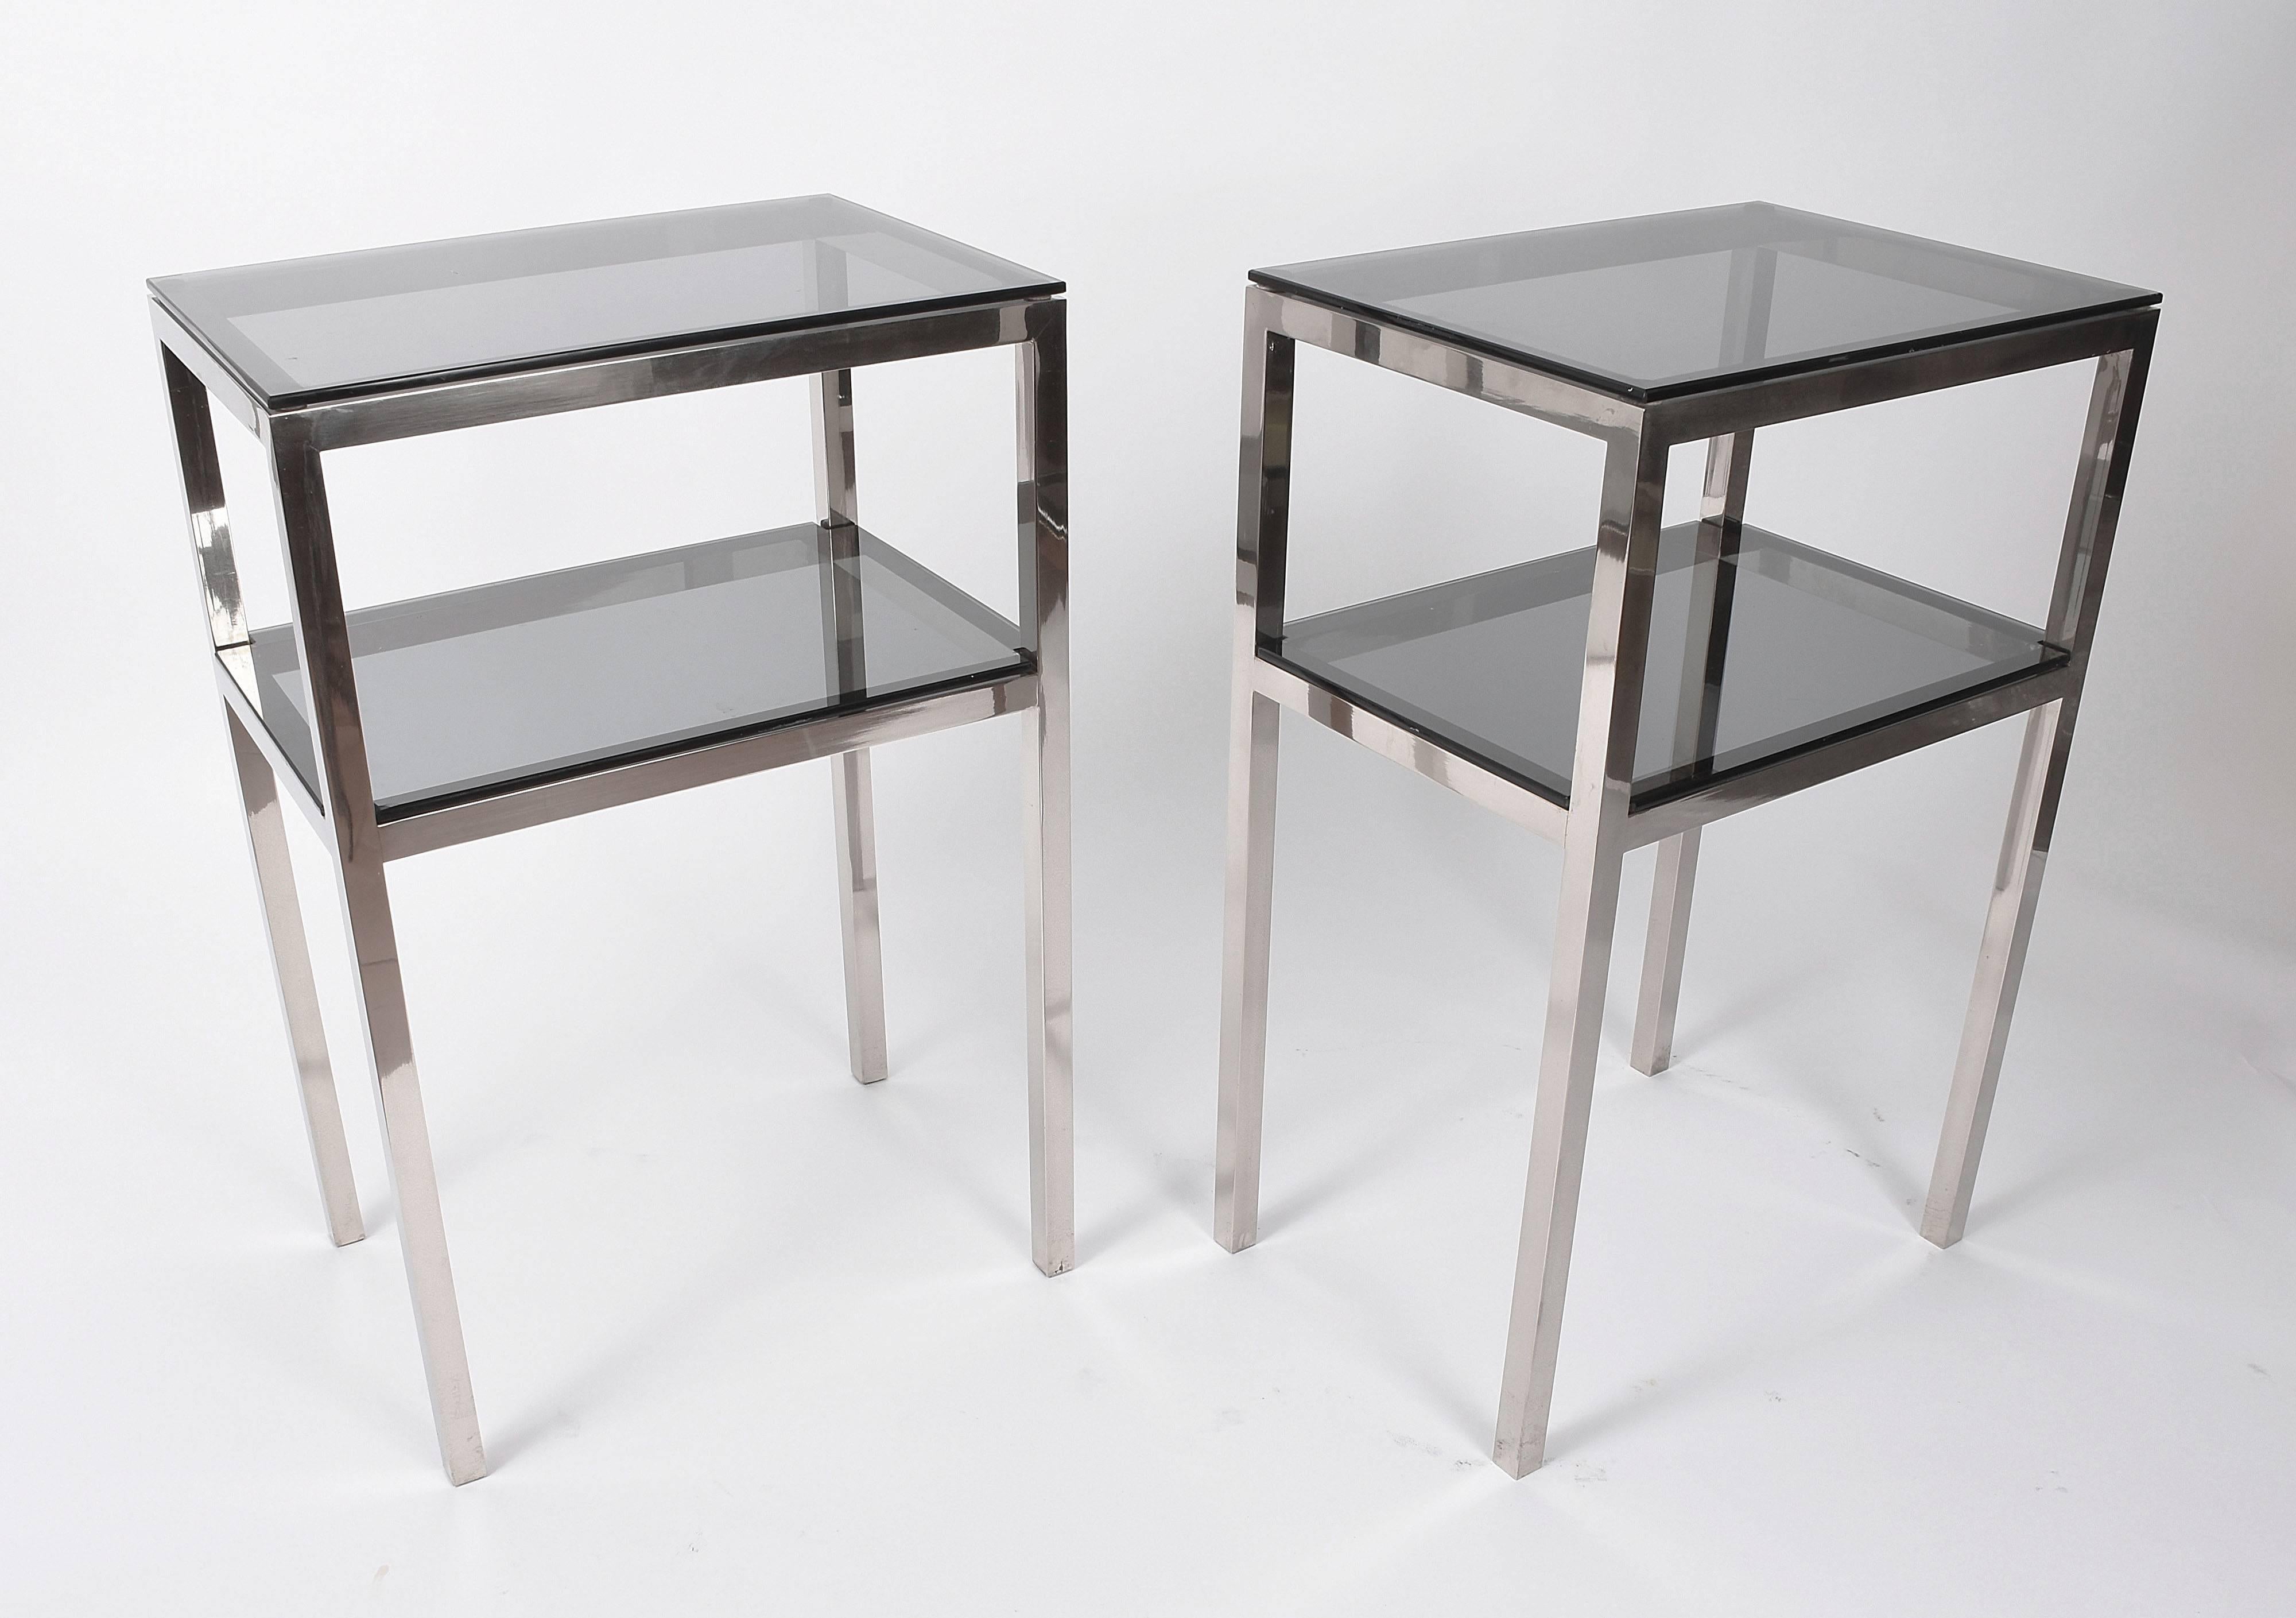 Italian Pair of Mid-Century Two-Tiered Accent Tables Attributed to Romeo Rega, Italy